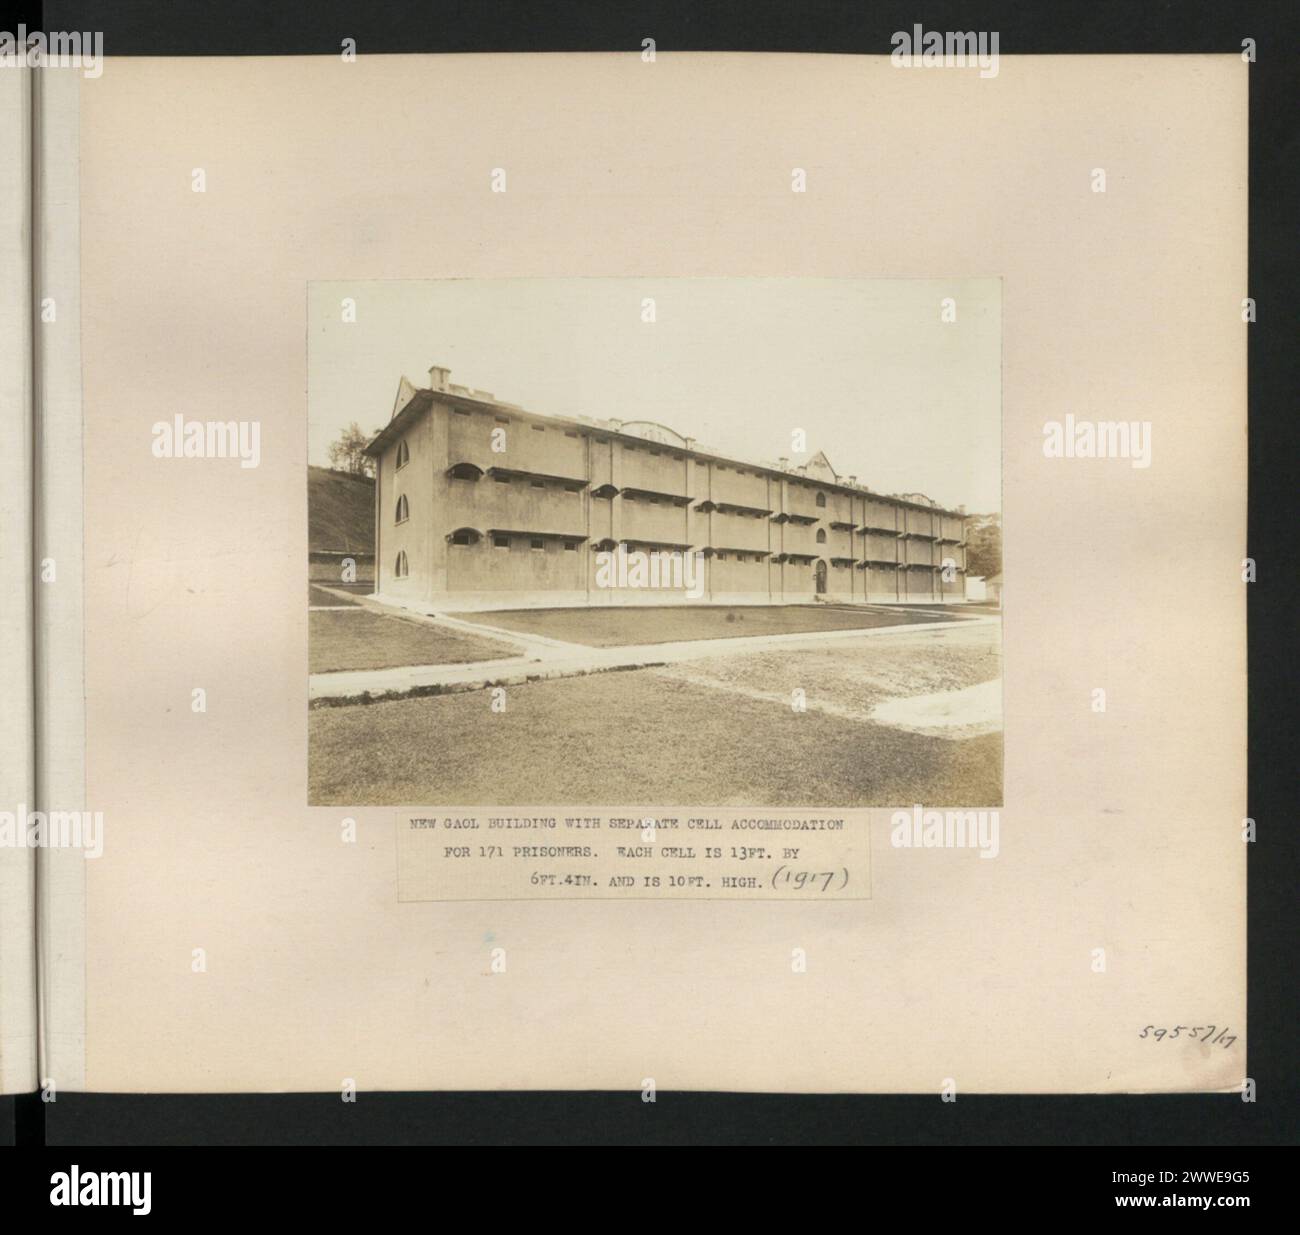 Description: New Gaol Building with separate cell accommodation for 171 prisoners. Each cell is 13ft. by 6ft.4in. and is 10ft. high. (1917). Location: Suva, Fiji Date: 1917 fiji, australasia, oceania, australasiathroughalens Stock Photo